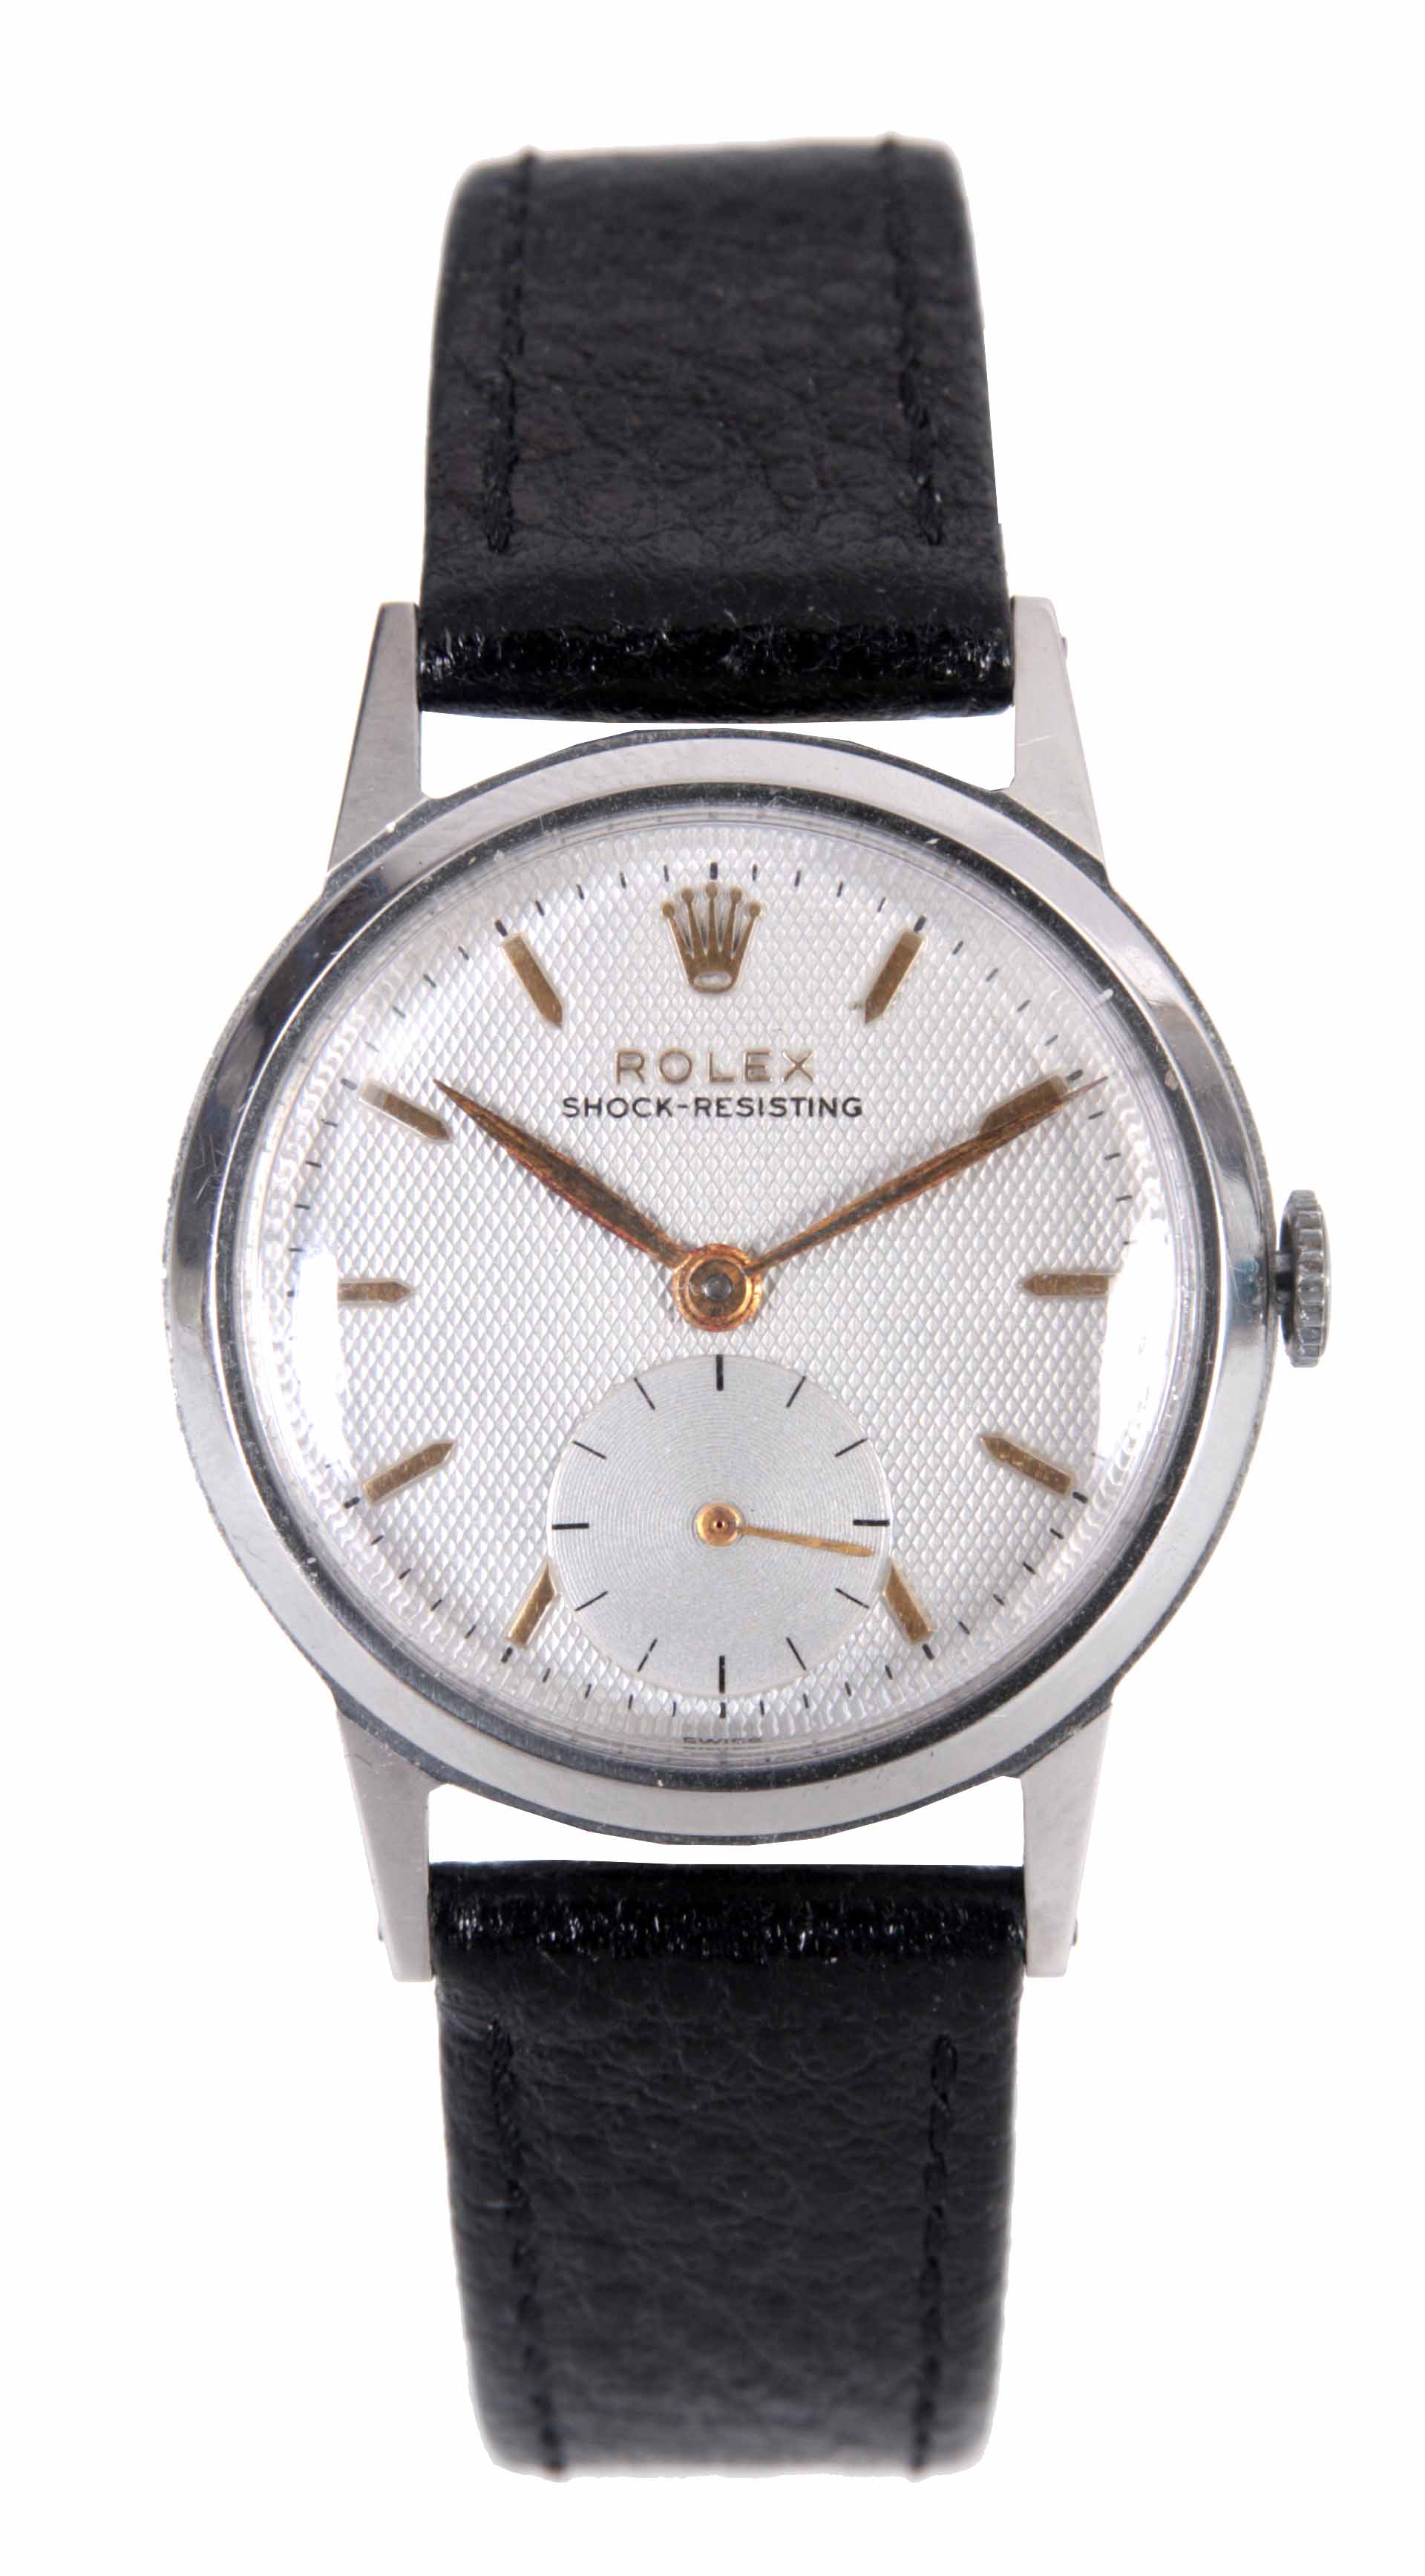 A GENTLEMAN'S 1950's STEEL ROLEX WRIST WATCH with smooth bezel enclosing a silvered honeycomb dial